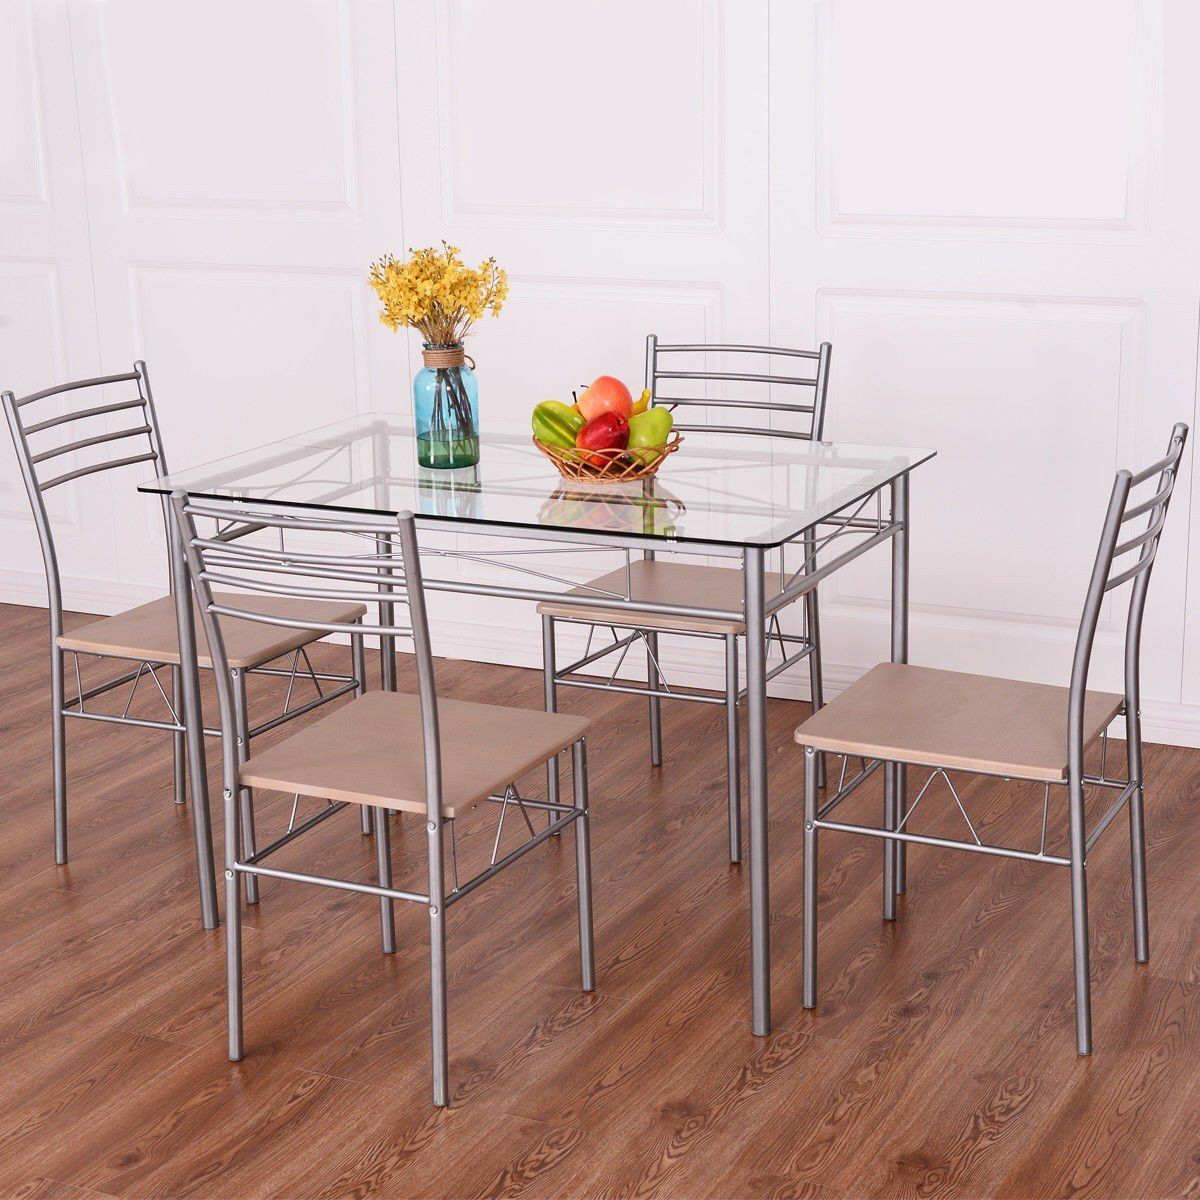 Haines 5 Piece Dining Set | Dining | Glass Dining Set, Furniture, 5 Inside Most Current Stouferberg 5 Piece Dining Sets (View 8 of 20)